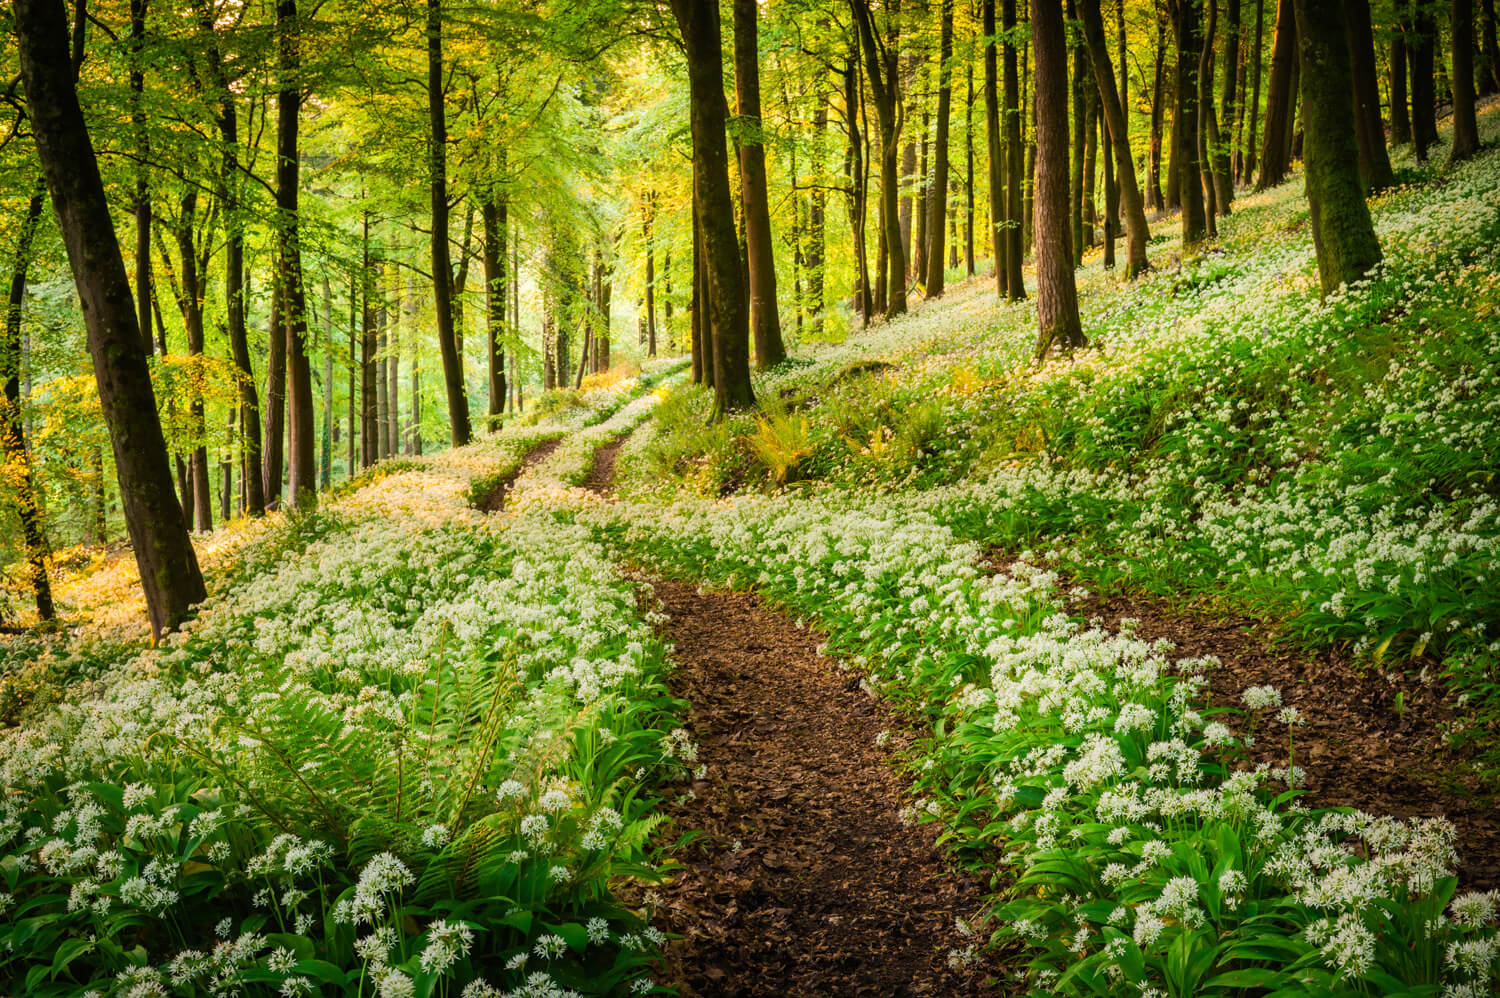 A winding forest path meanders through a lush woodland, carpeted with a profusion of white wild garlic flowers. Tall trees with fresh green leaves form a tranquil canopy, filtering sunlight that dapples the ground.